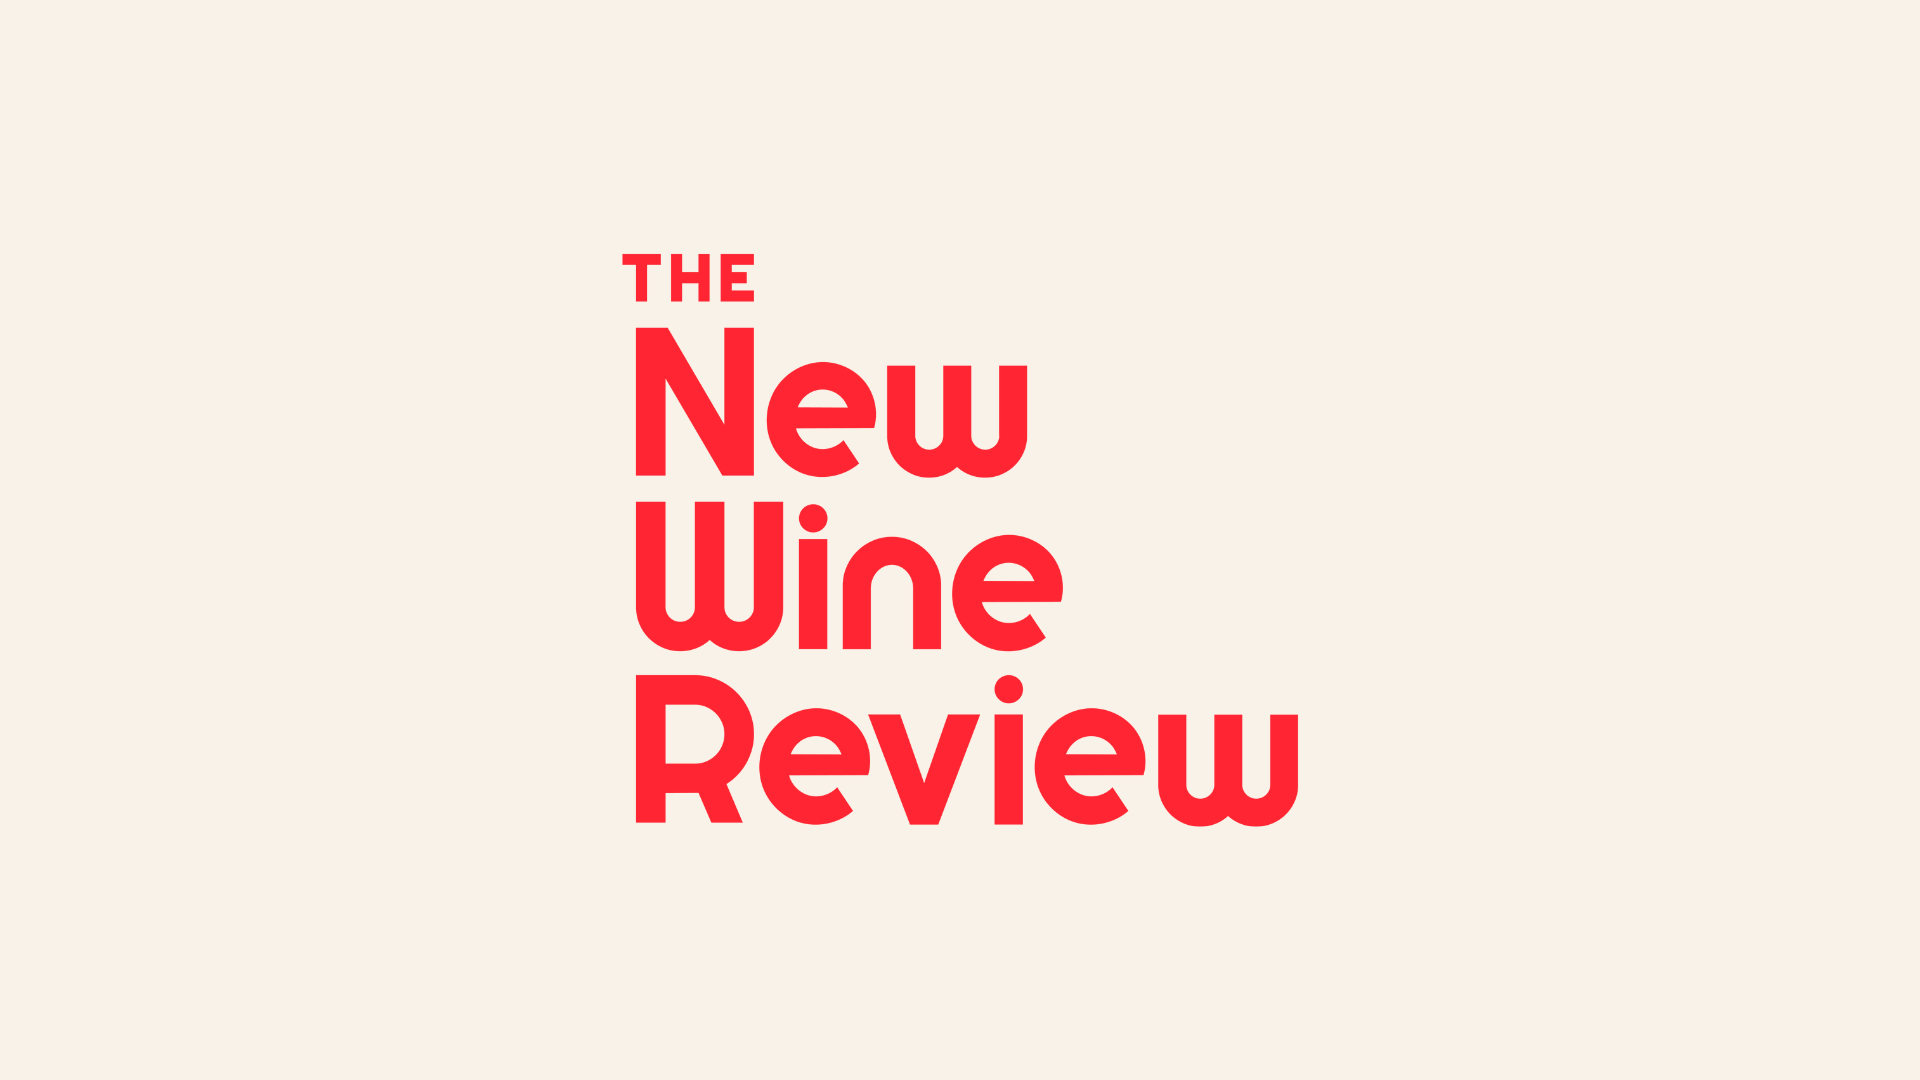 New Wine Review